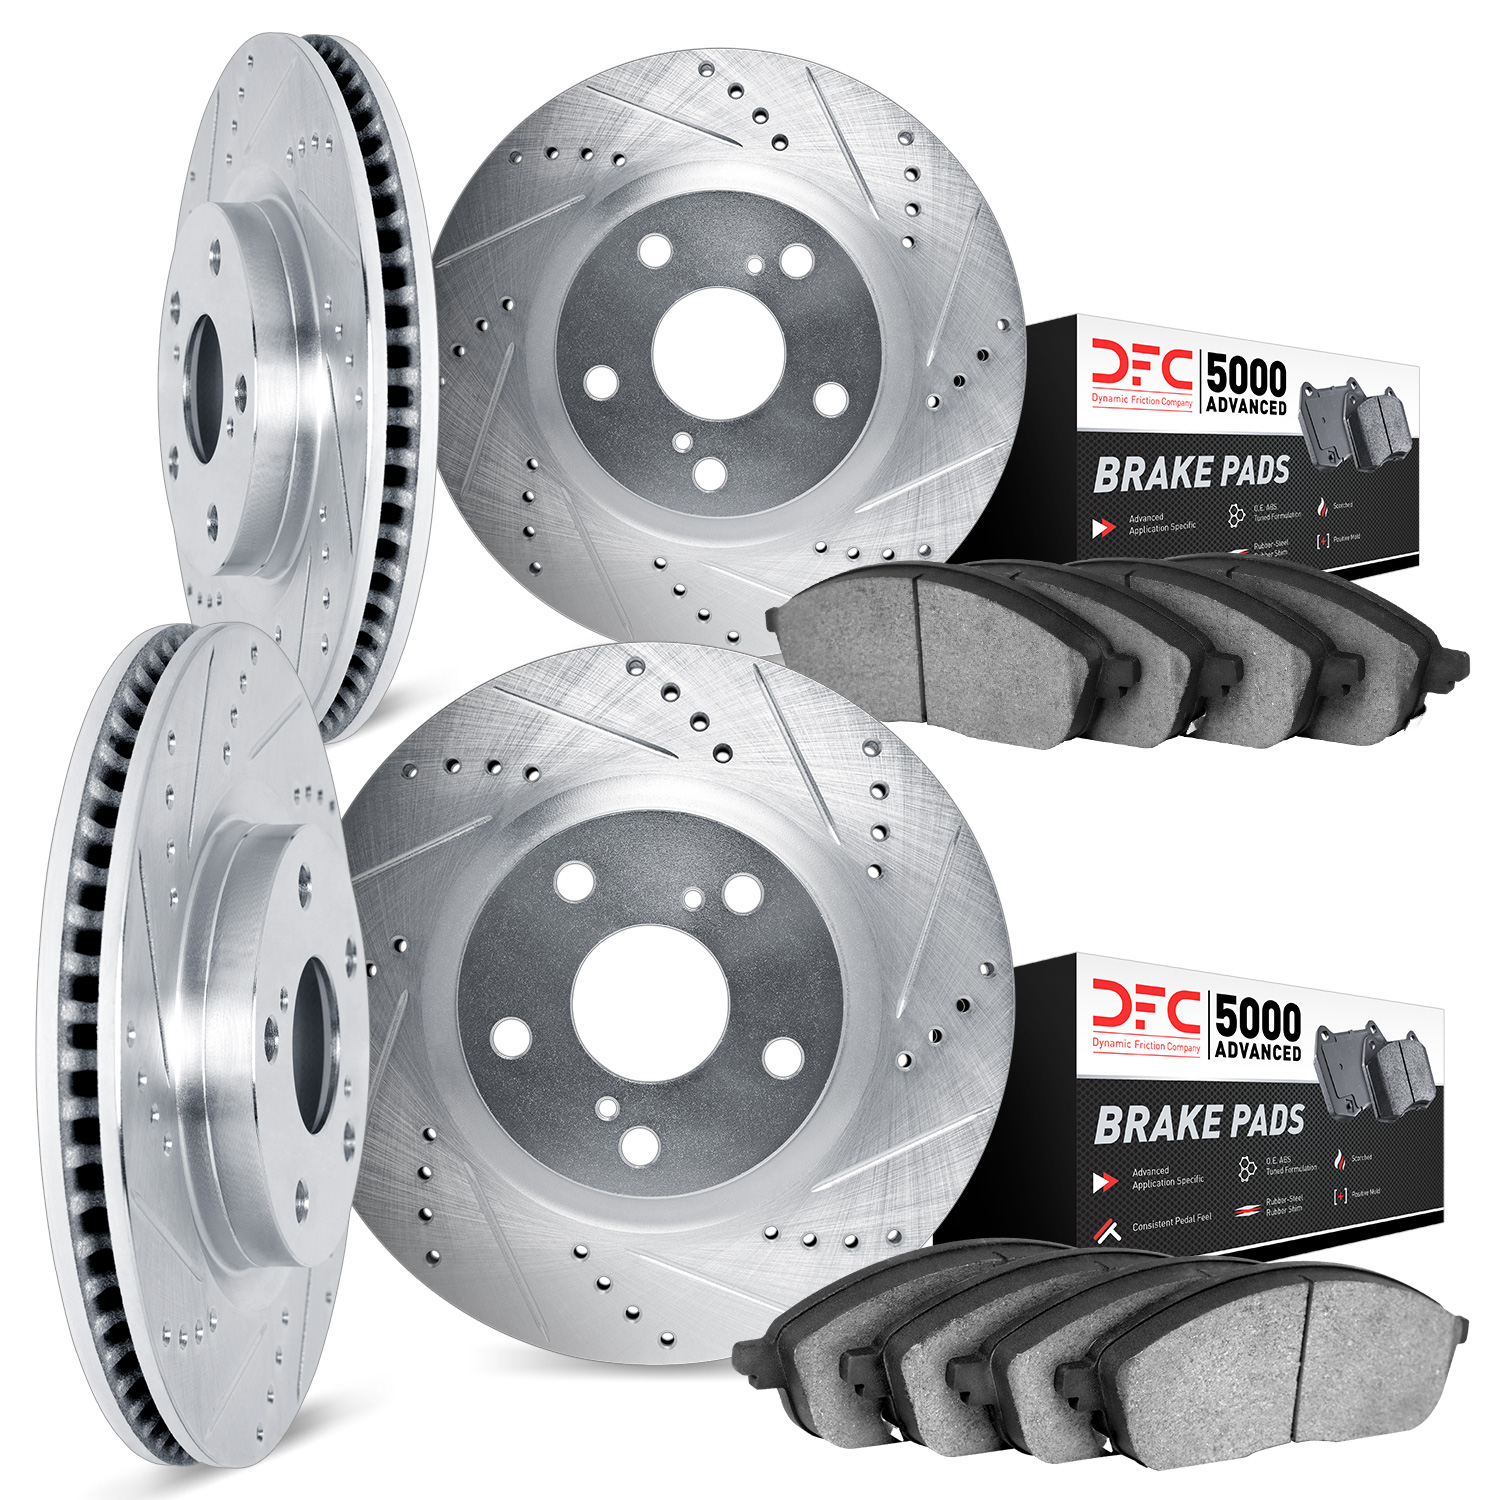 7504-40239 Drilled/Slotted Brake Rotors w/5000 Advanced Brake Pads Kit [Silver], 2008-2012 Mopar, Position: Front and Rear